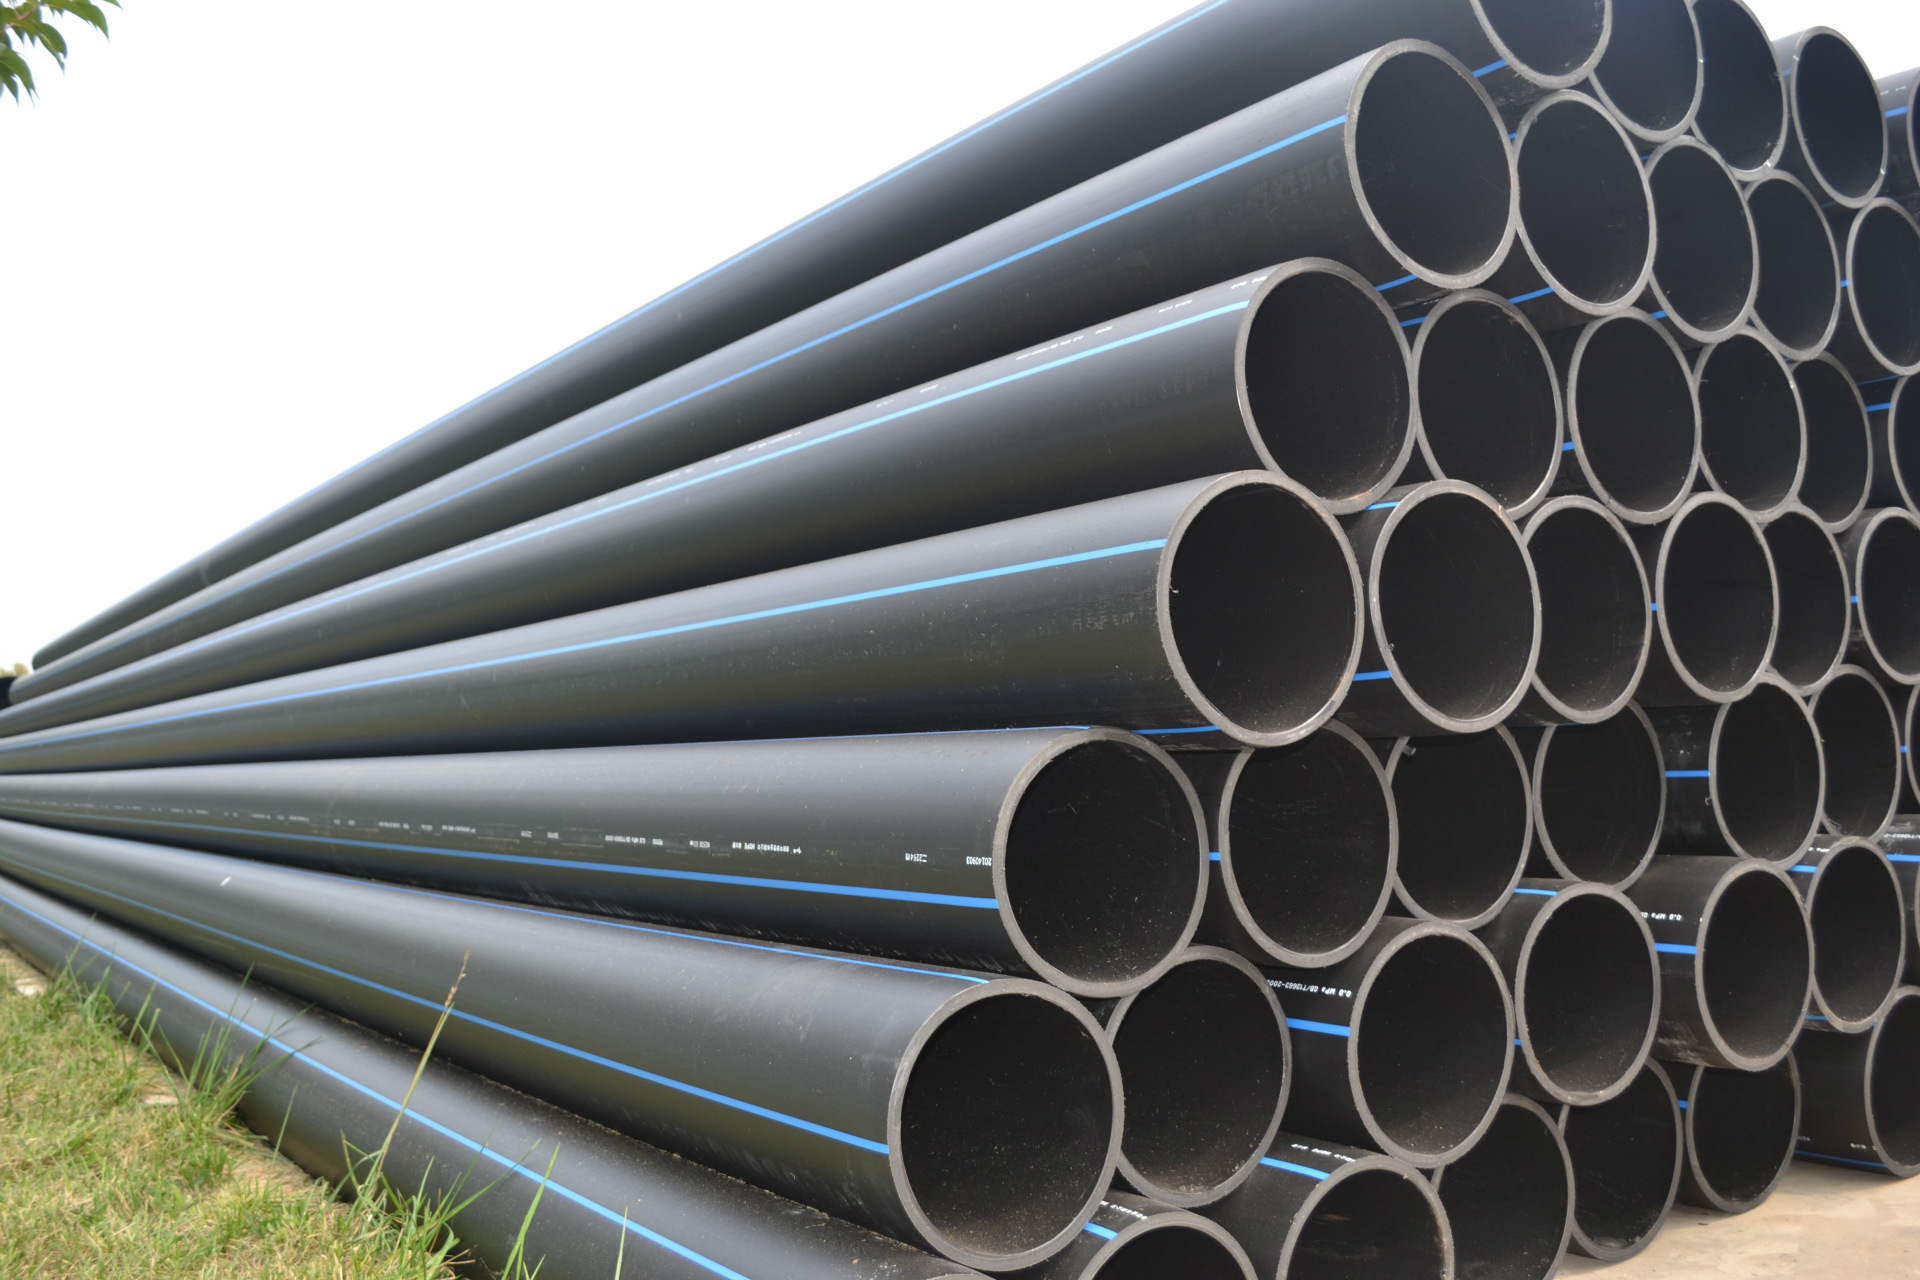 what is the applications of the PE pipe?